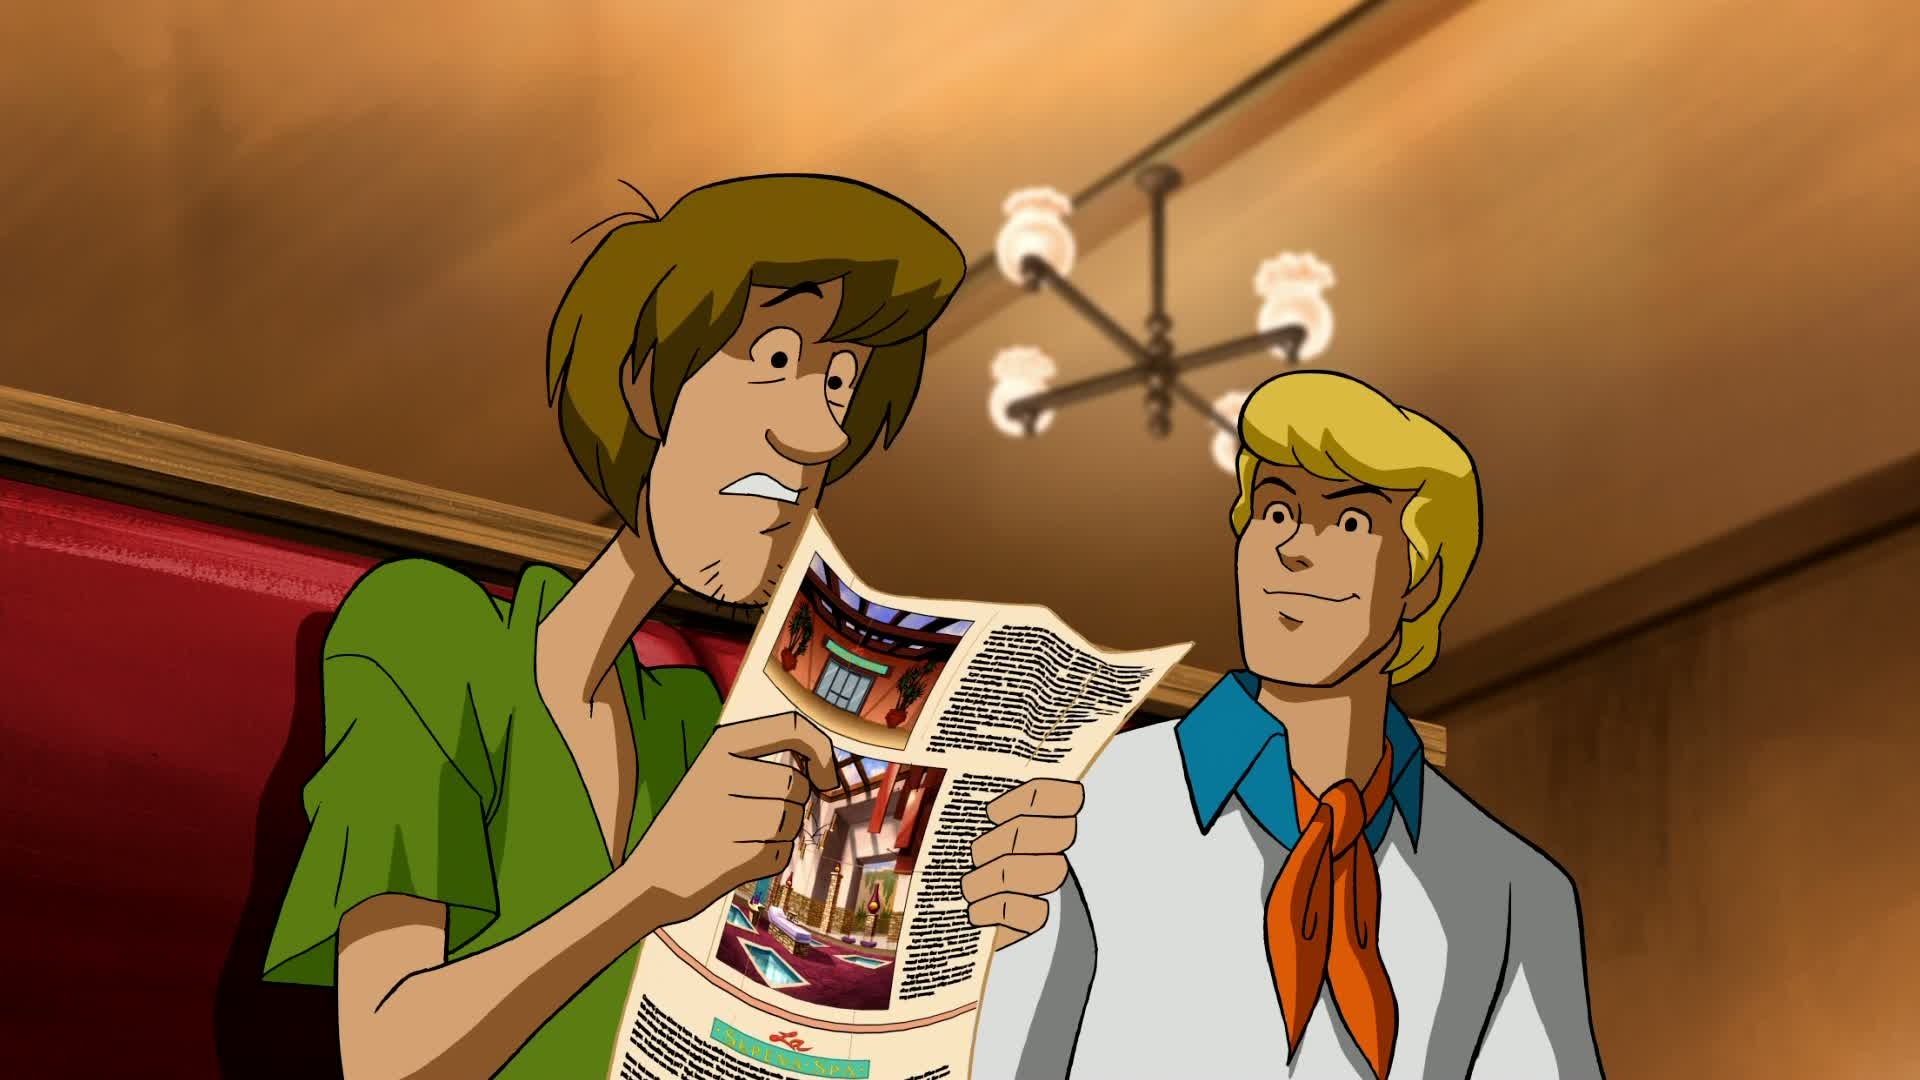 How about Shaggy giving Fred one hell of a deepthroat? 